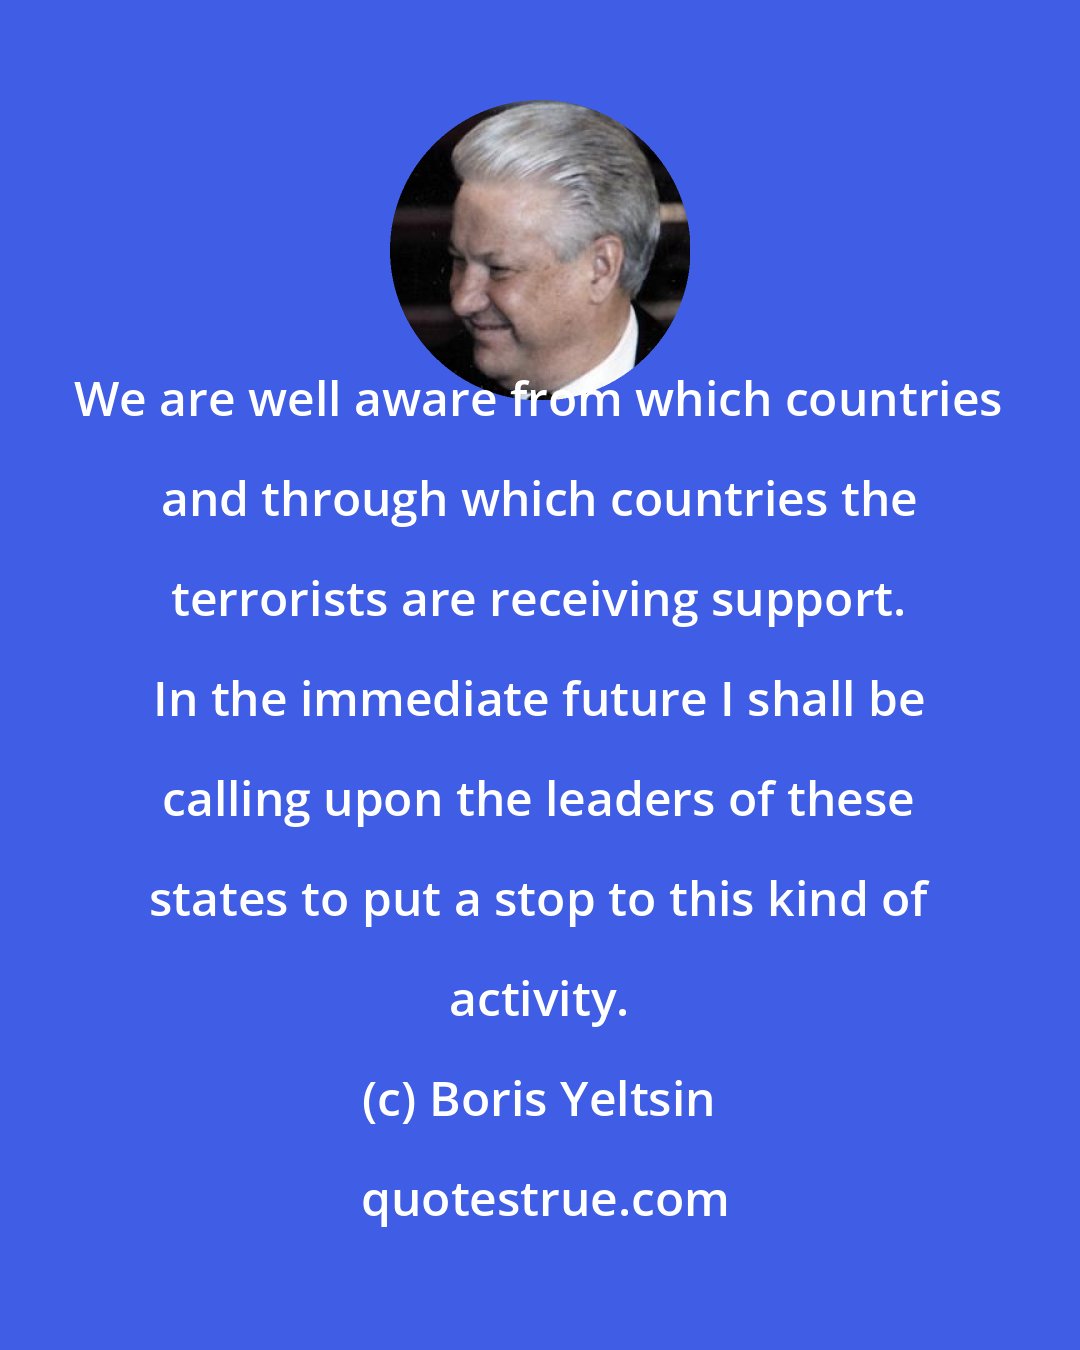 Boris Yeltsin: We are well aware from which countries and through which countries the terrorists are receiving support. In the immediate future I shall be calling upon the leaders of these states to put a stop to this kind of activity.